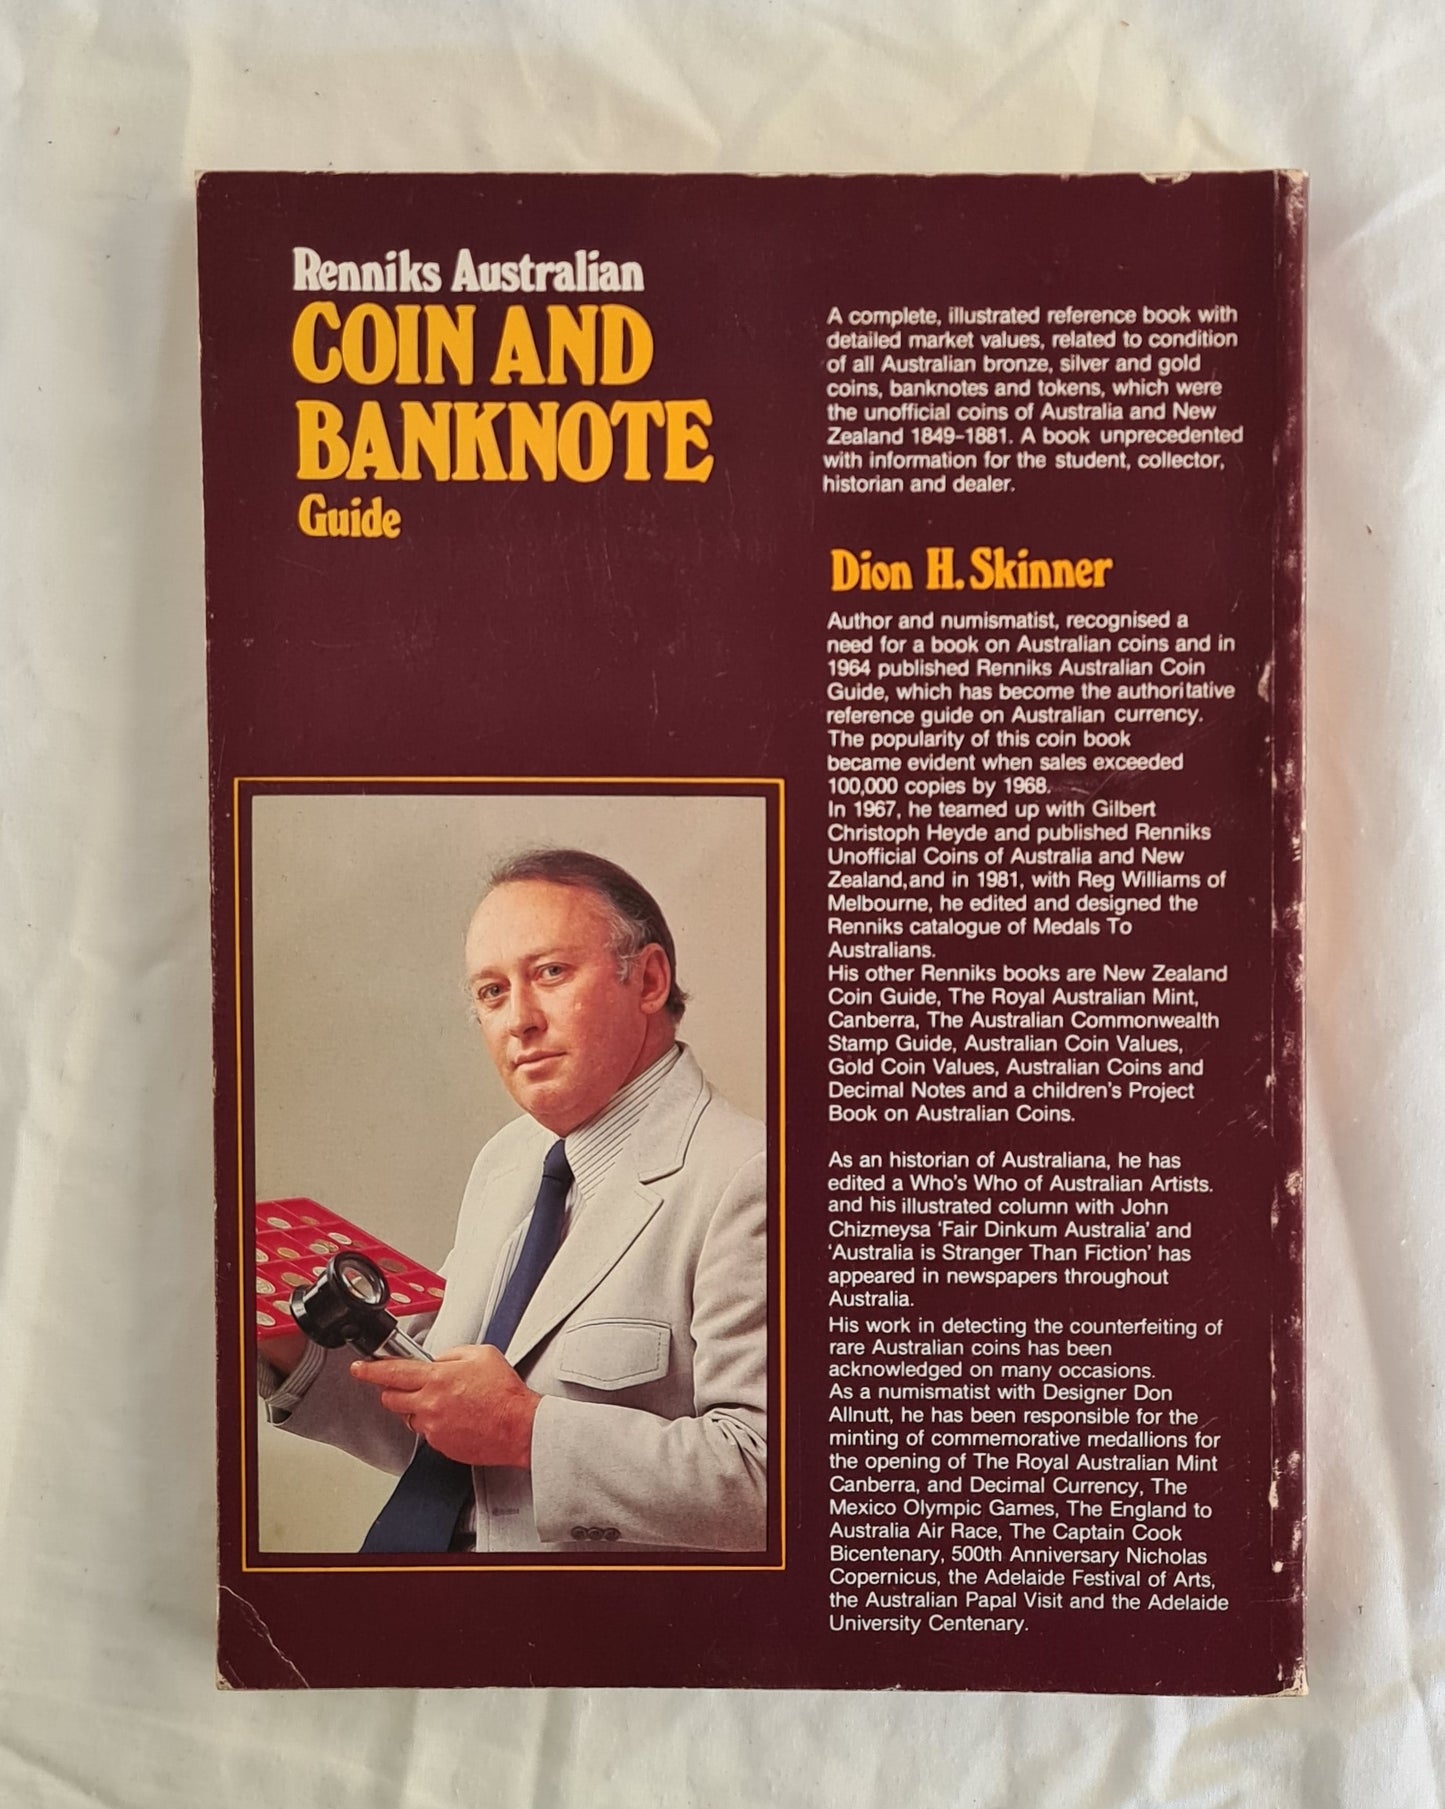 Renniks Australian Coin and Banknote Guide by Dion H. Skinner